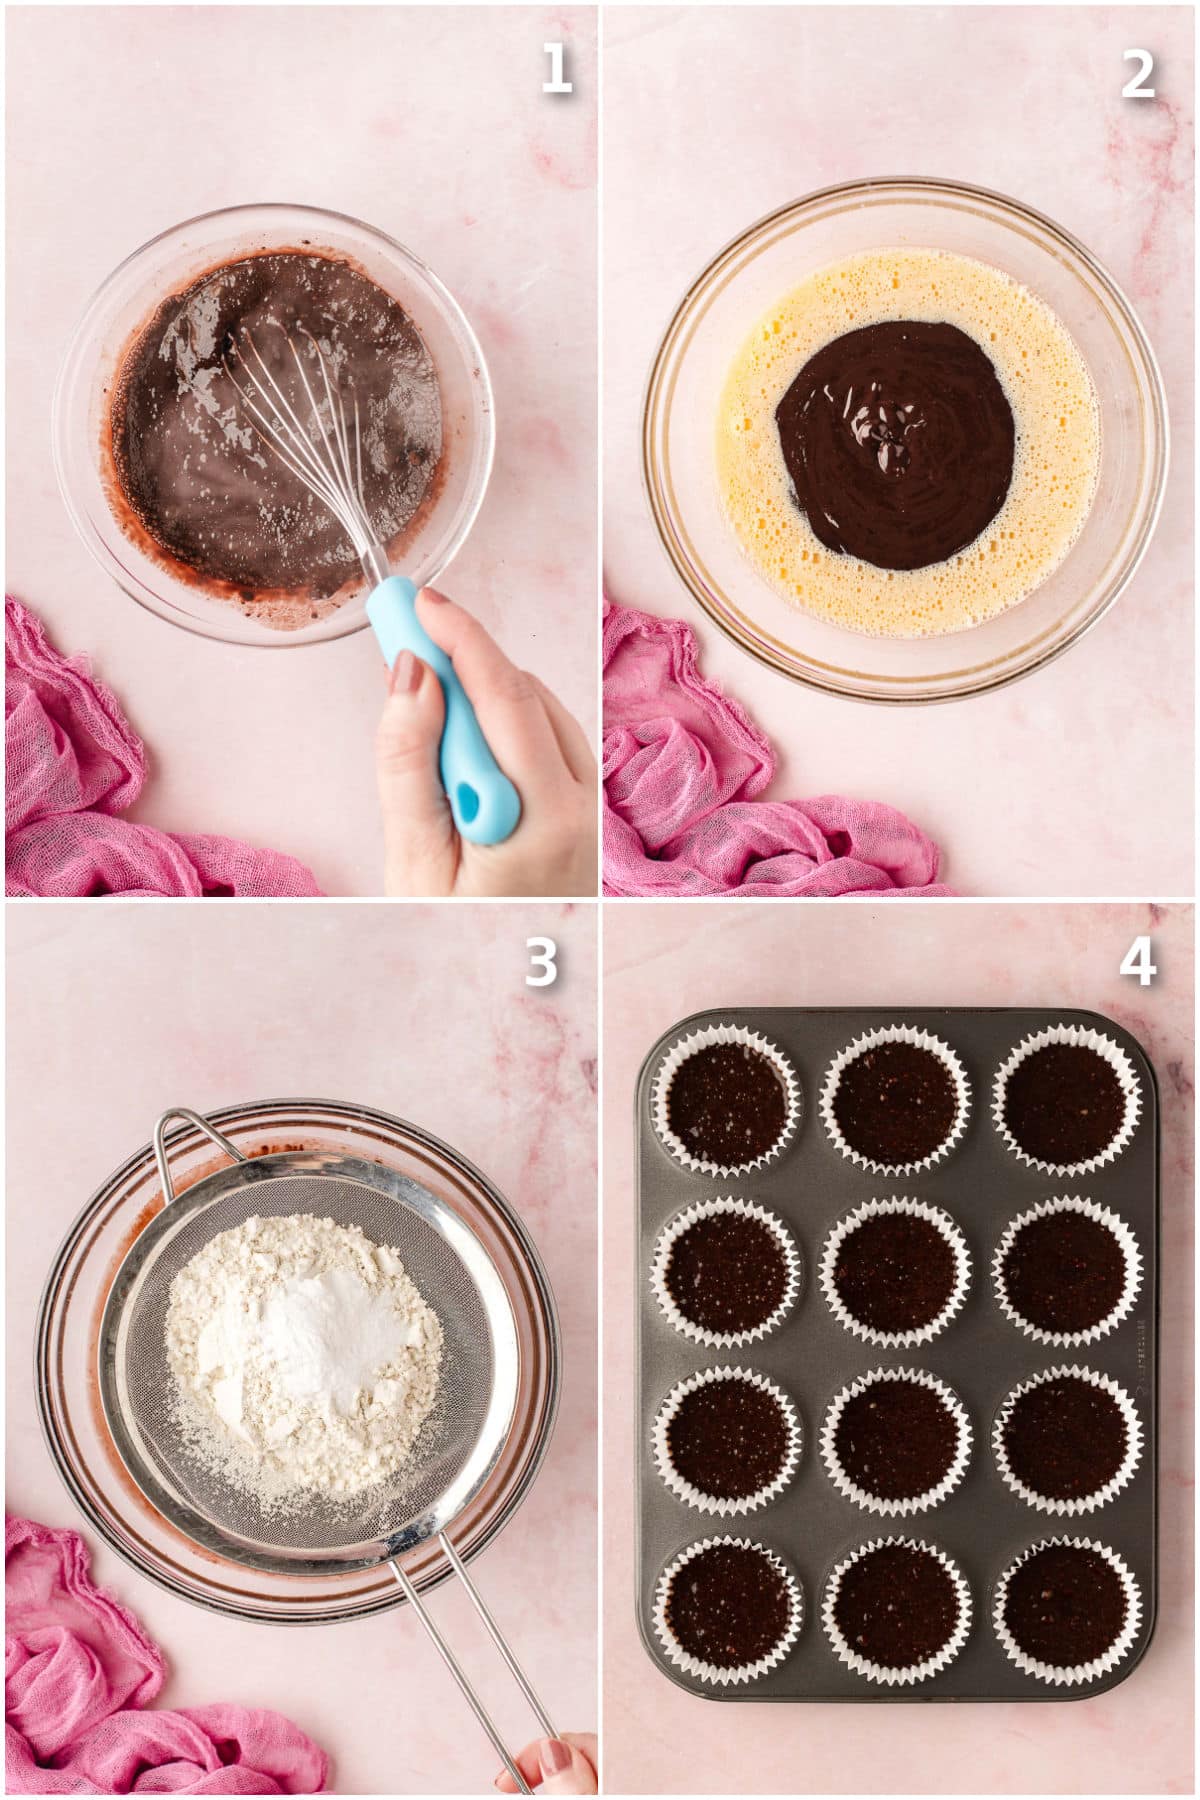 Chocolate cake batter being made and poured into muffin tins.